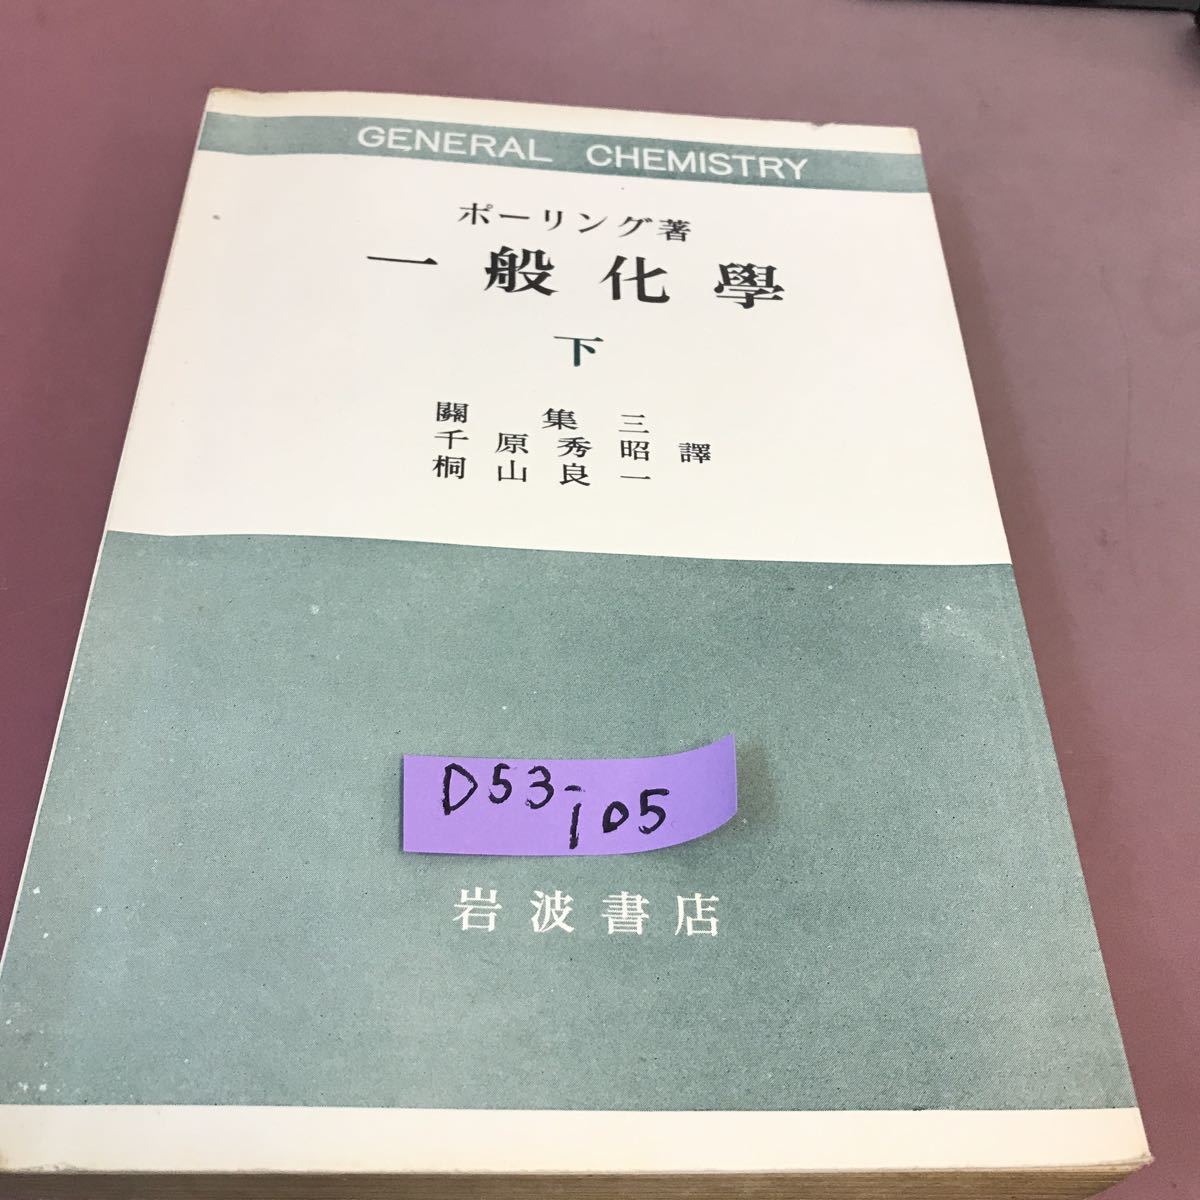 D53-105 一般化學 下 ボーリング 岩波書店 _画像1